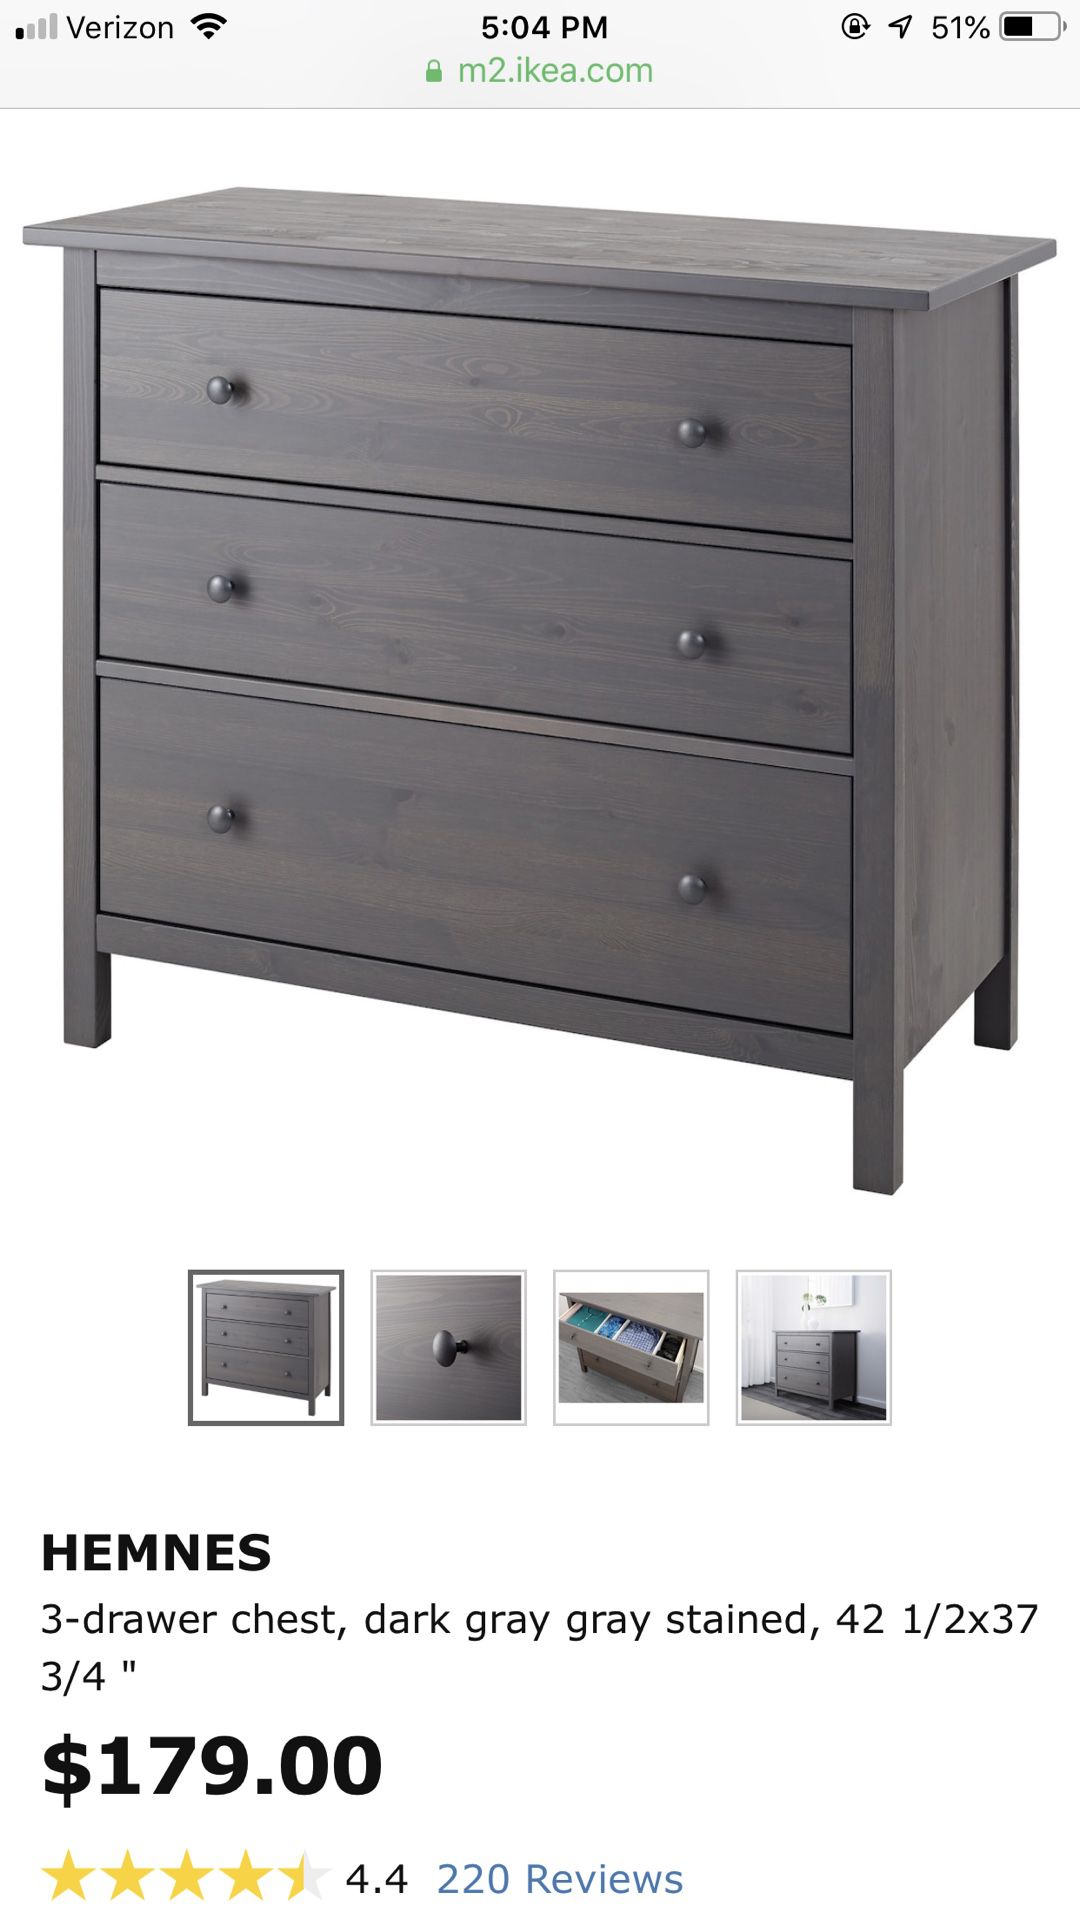 IKEA DRESSER - GRAY STAINED